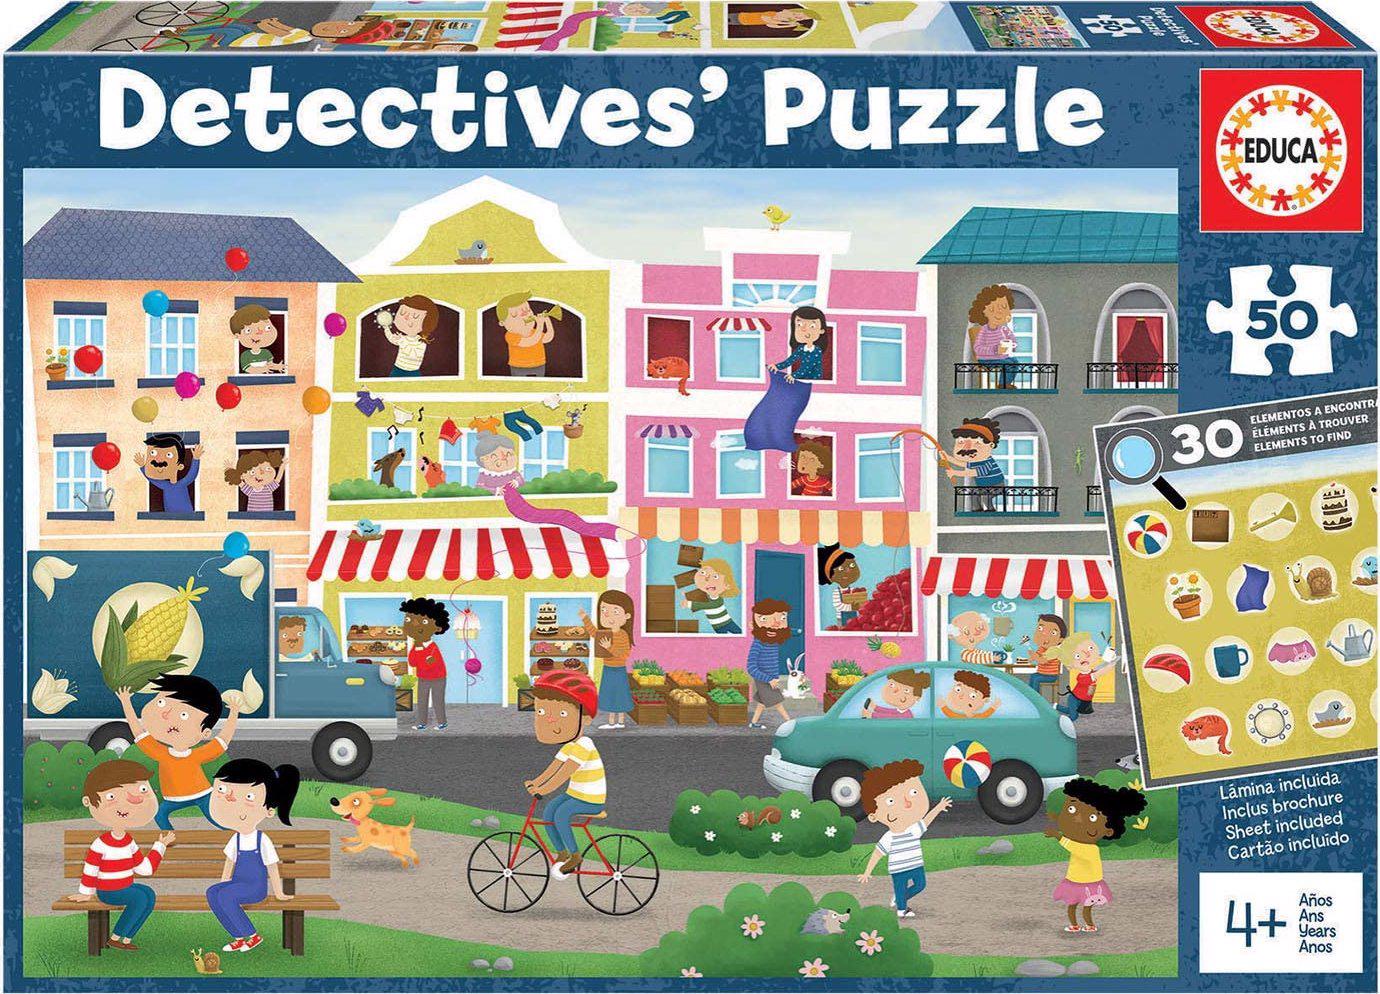 Puzzle Detectives Busy Town